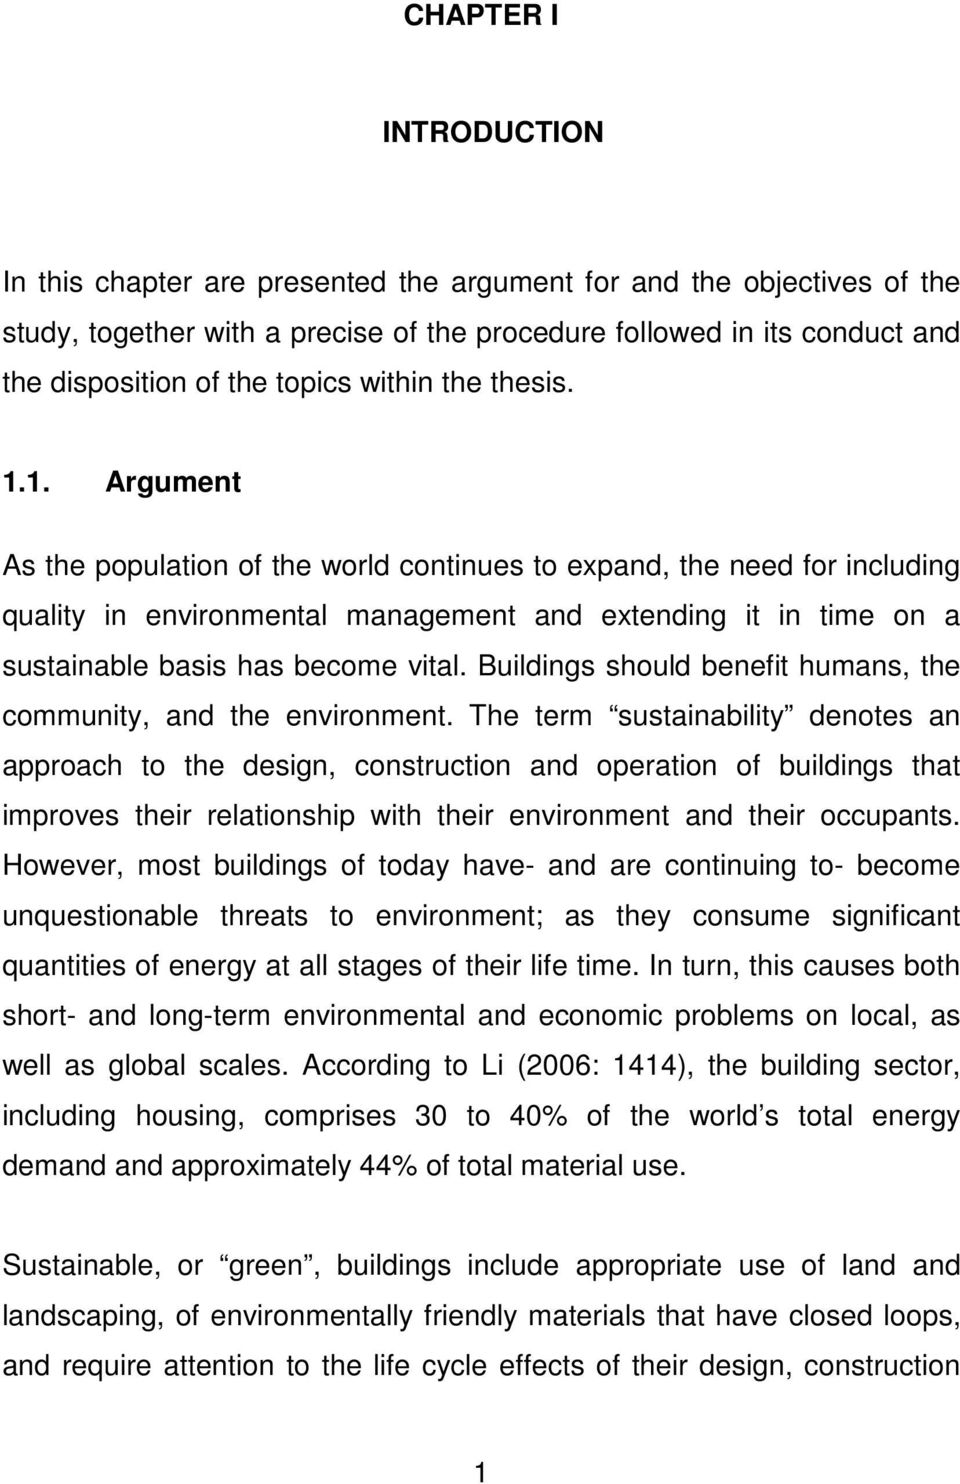 the thesis. 1.1. Argument As the population of the world continues to expand, the need for including quality in environmental management and extending it in time on a sustainable basis has become vital.